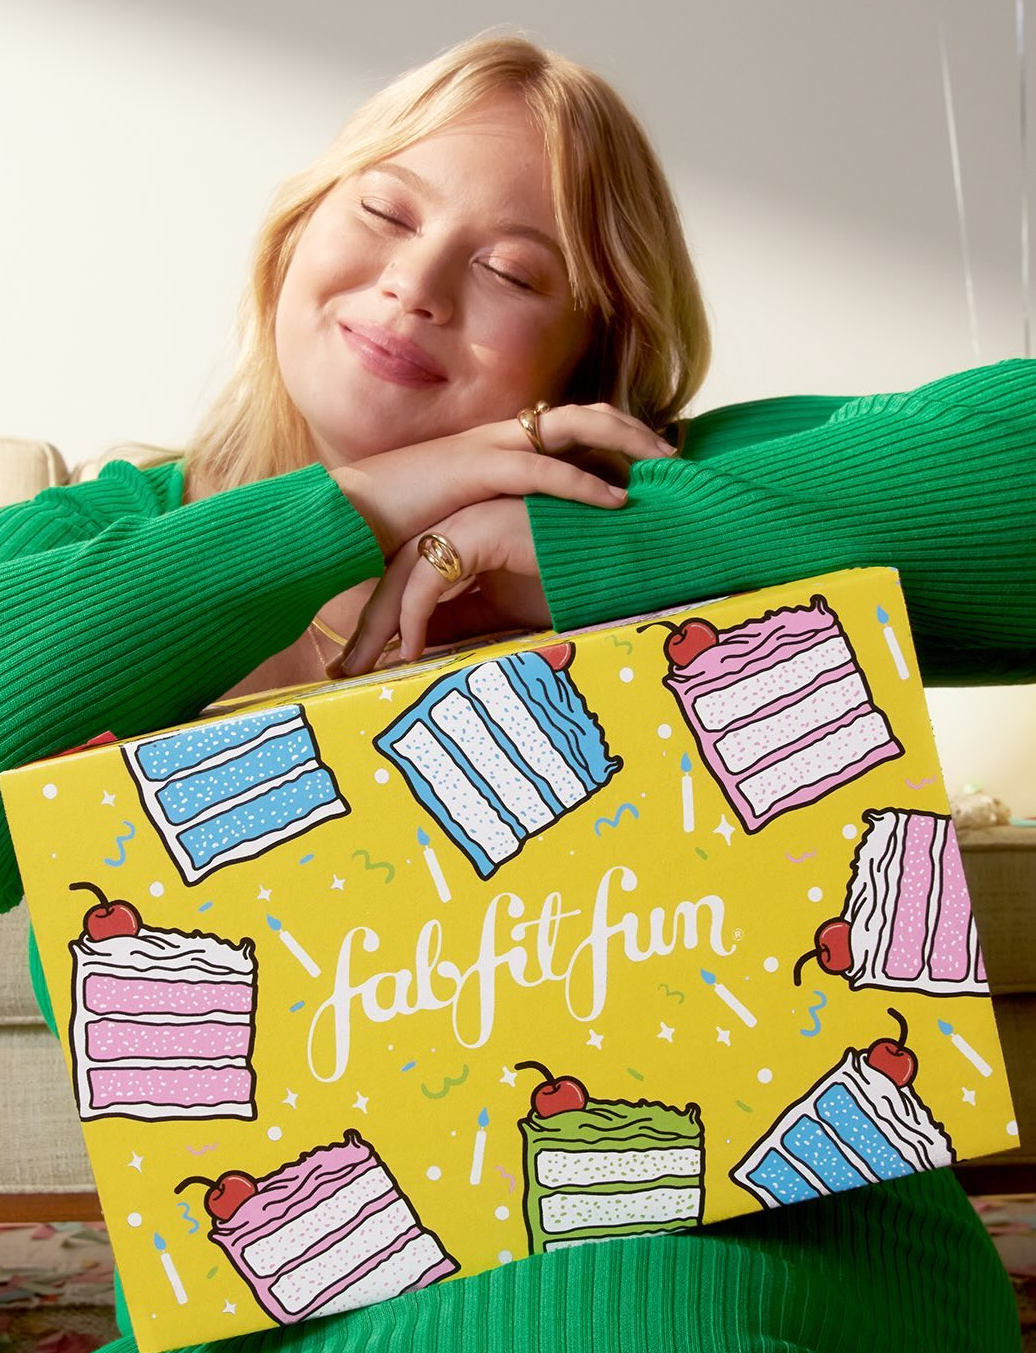 Why the Fabric of Your Underwear Matters - FabFitFun